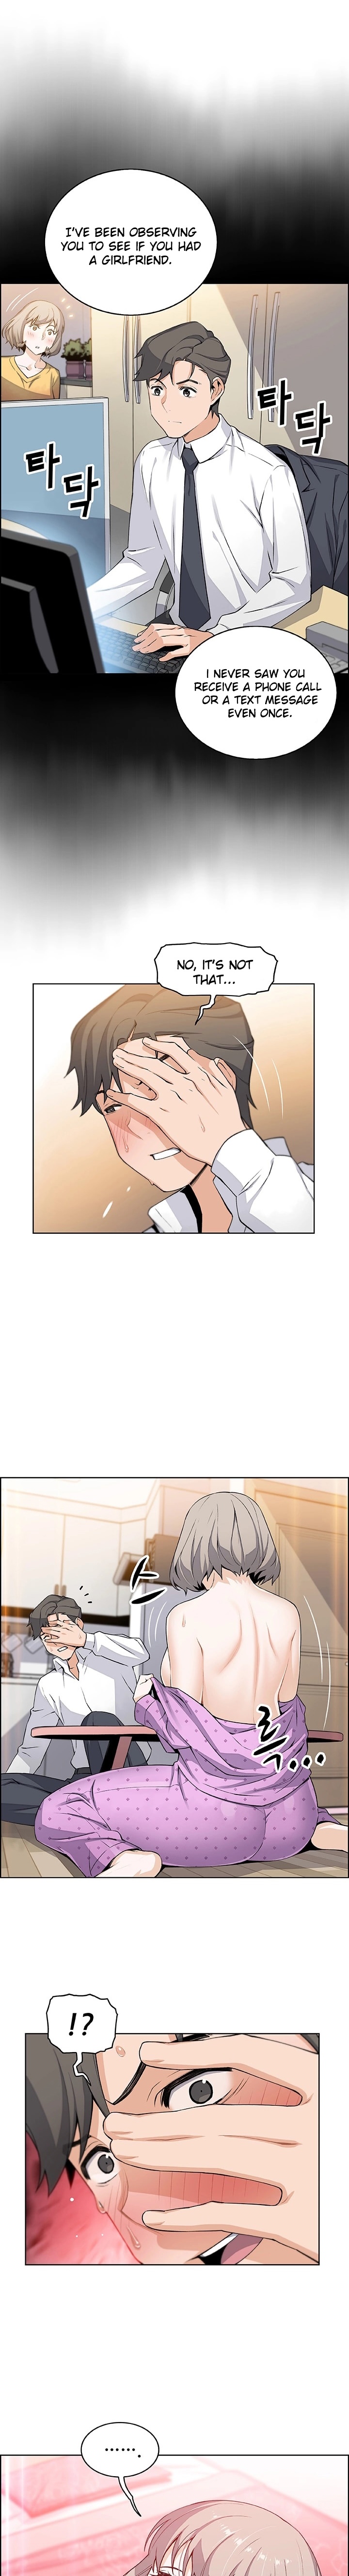 Housekeeper Manhwa - Chapter 17 Page 4